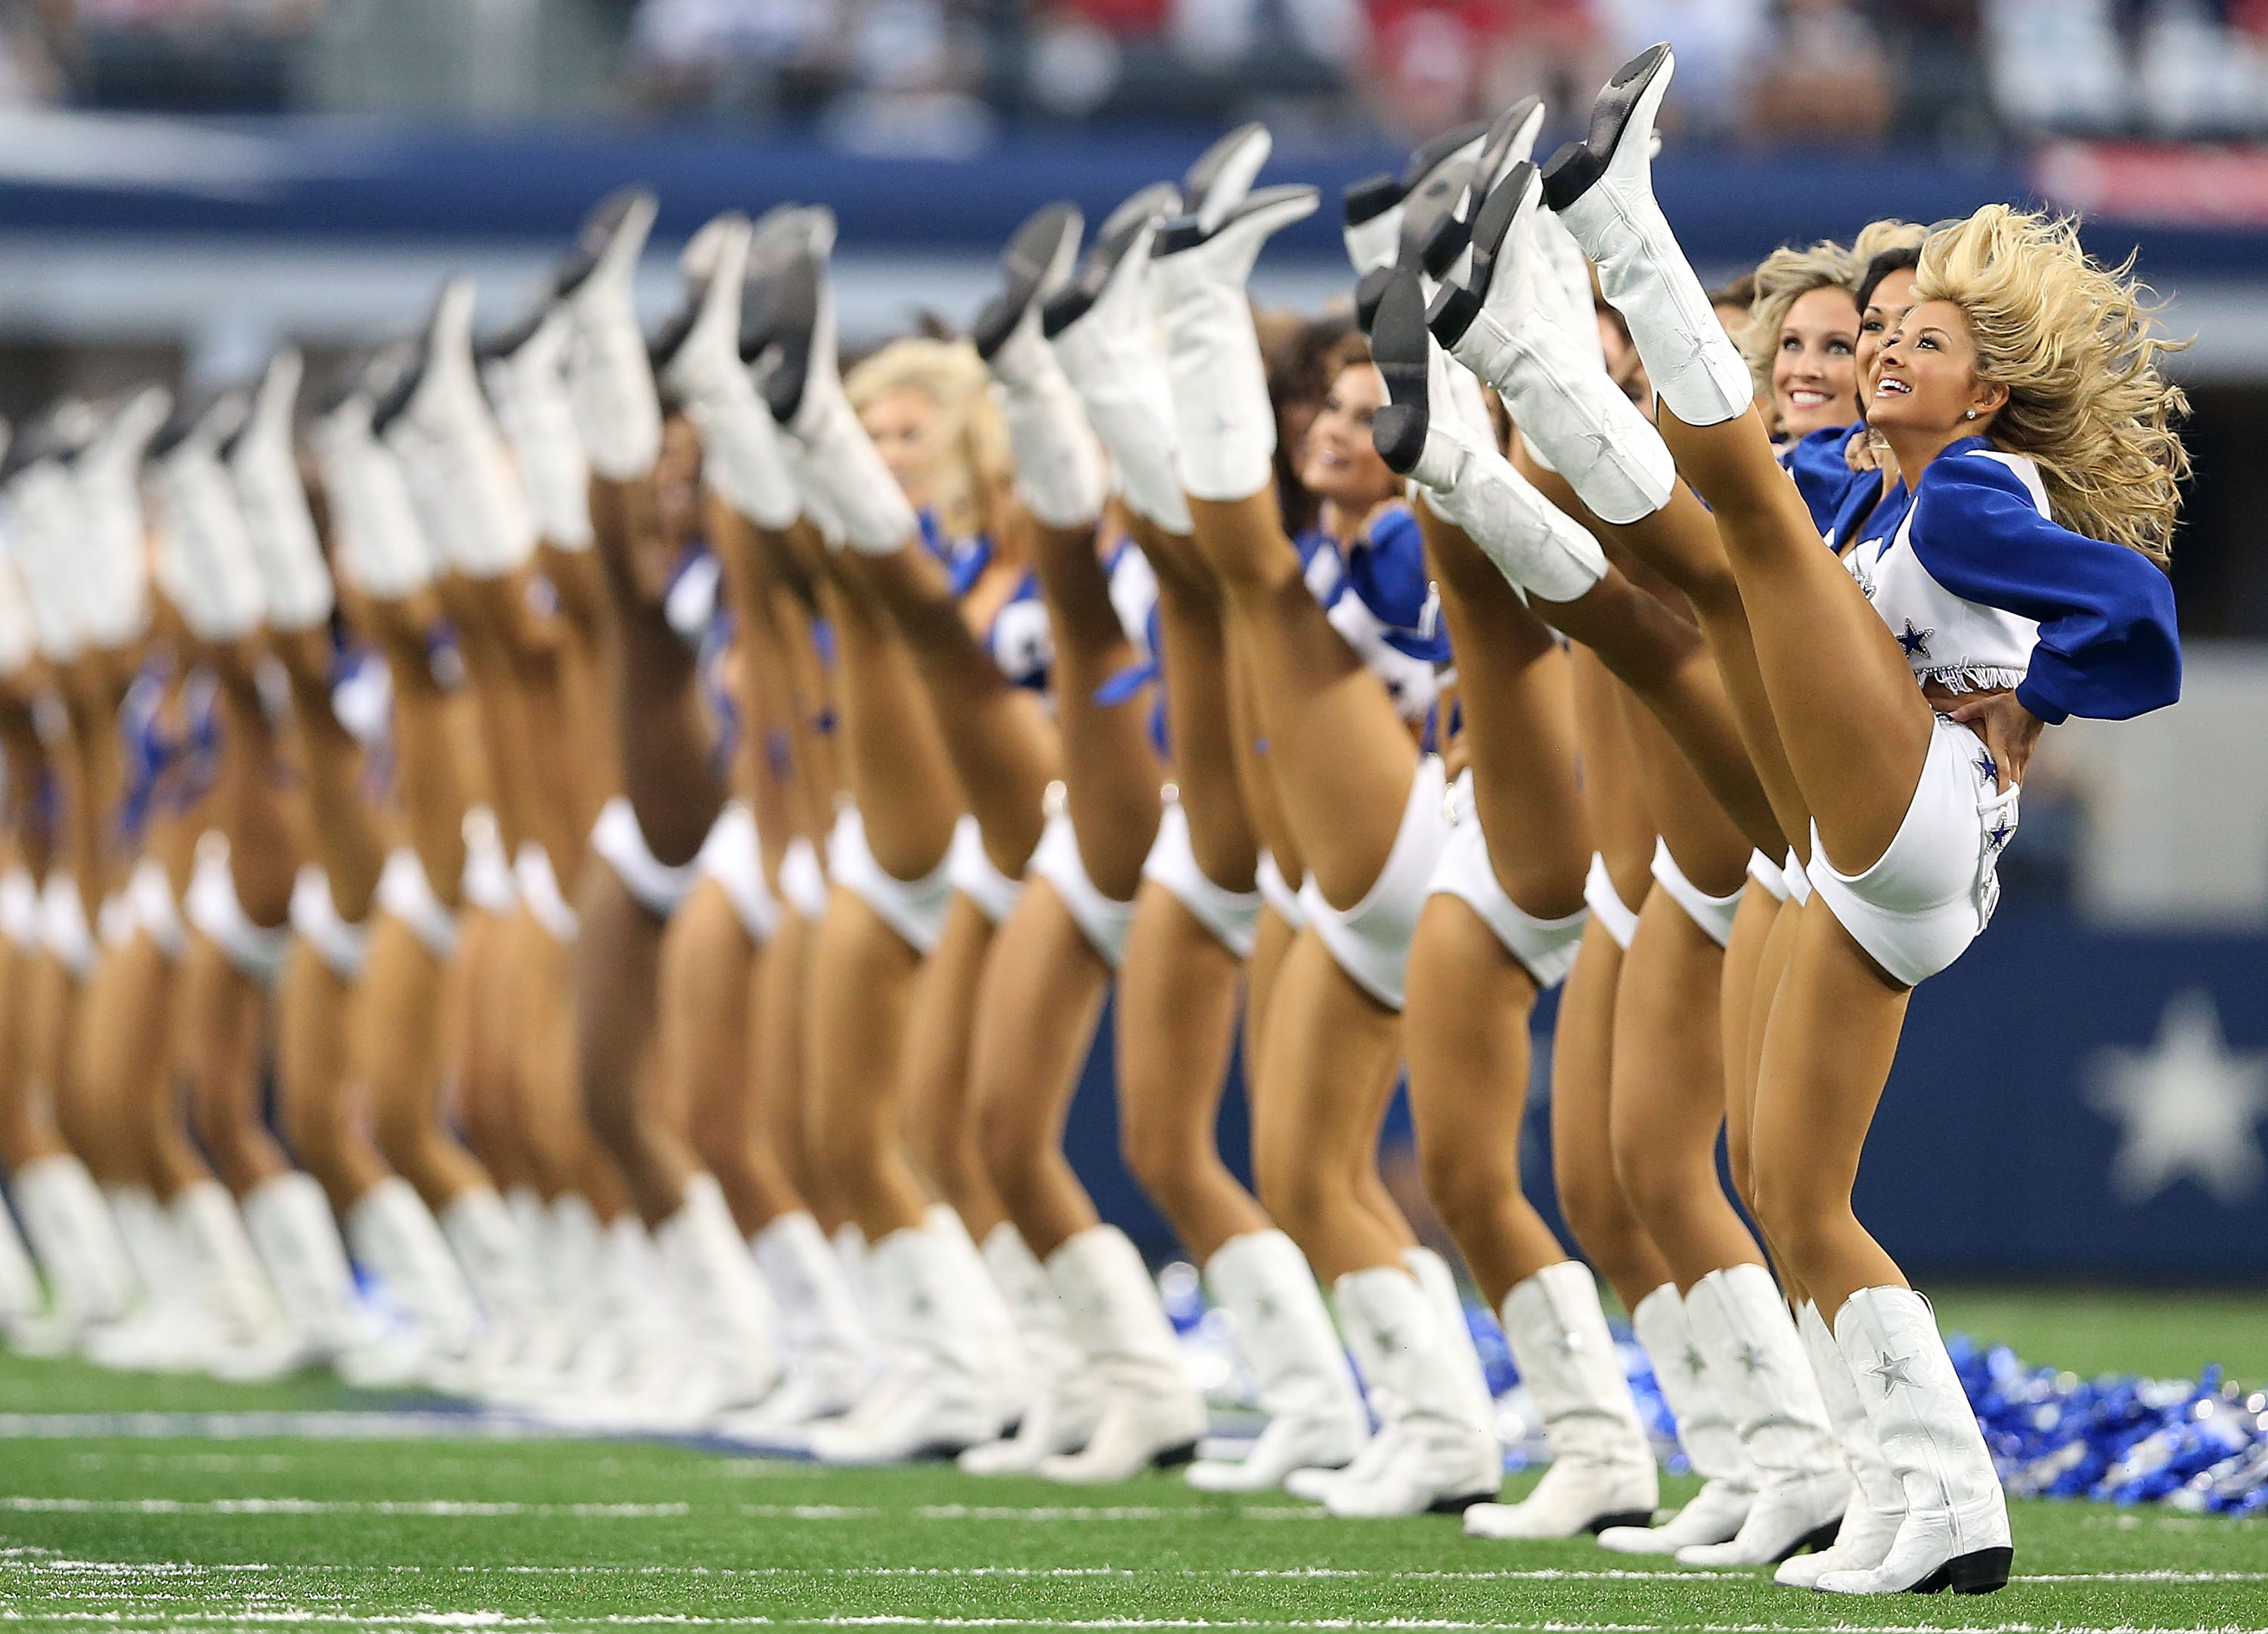 Remembering Suzanne Mitchell, the Longtime Director of the Dallas Cowboys Cheerleaders picture